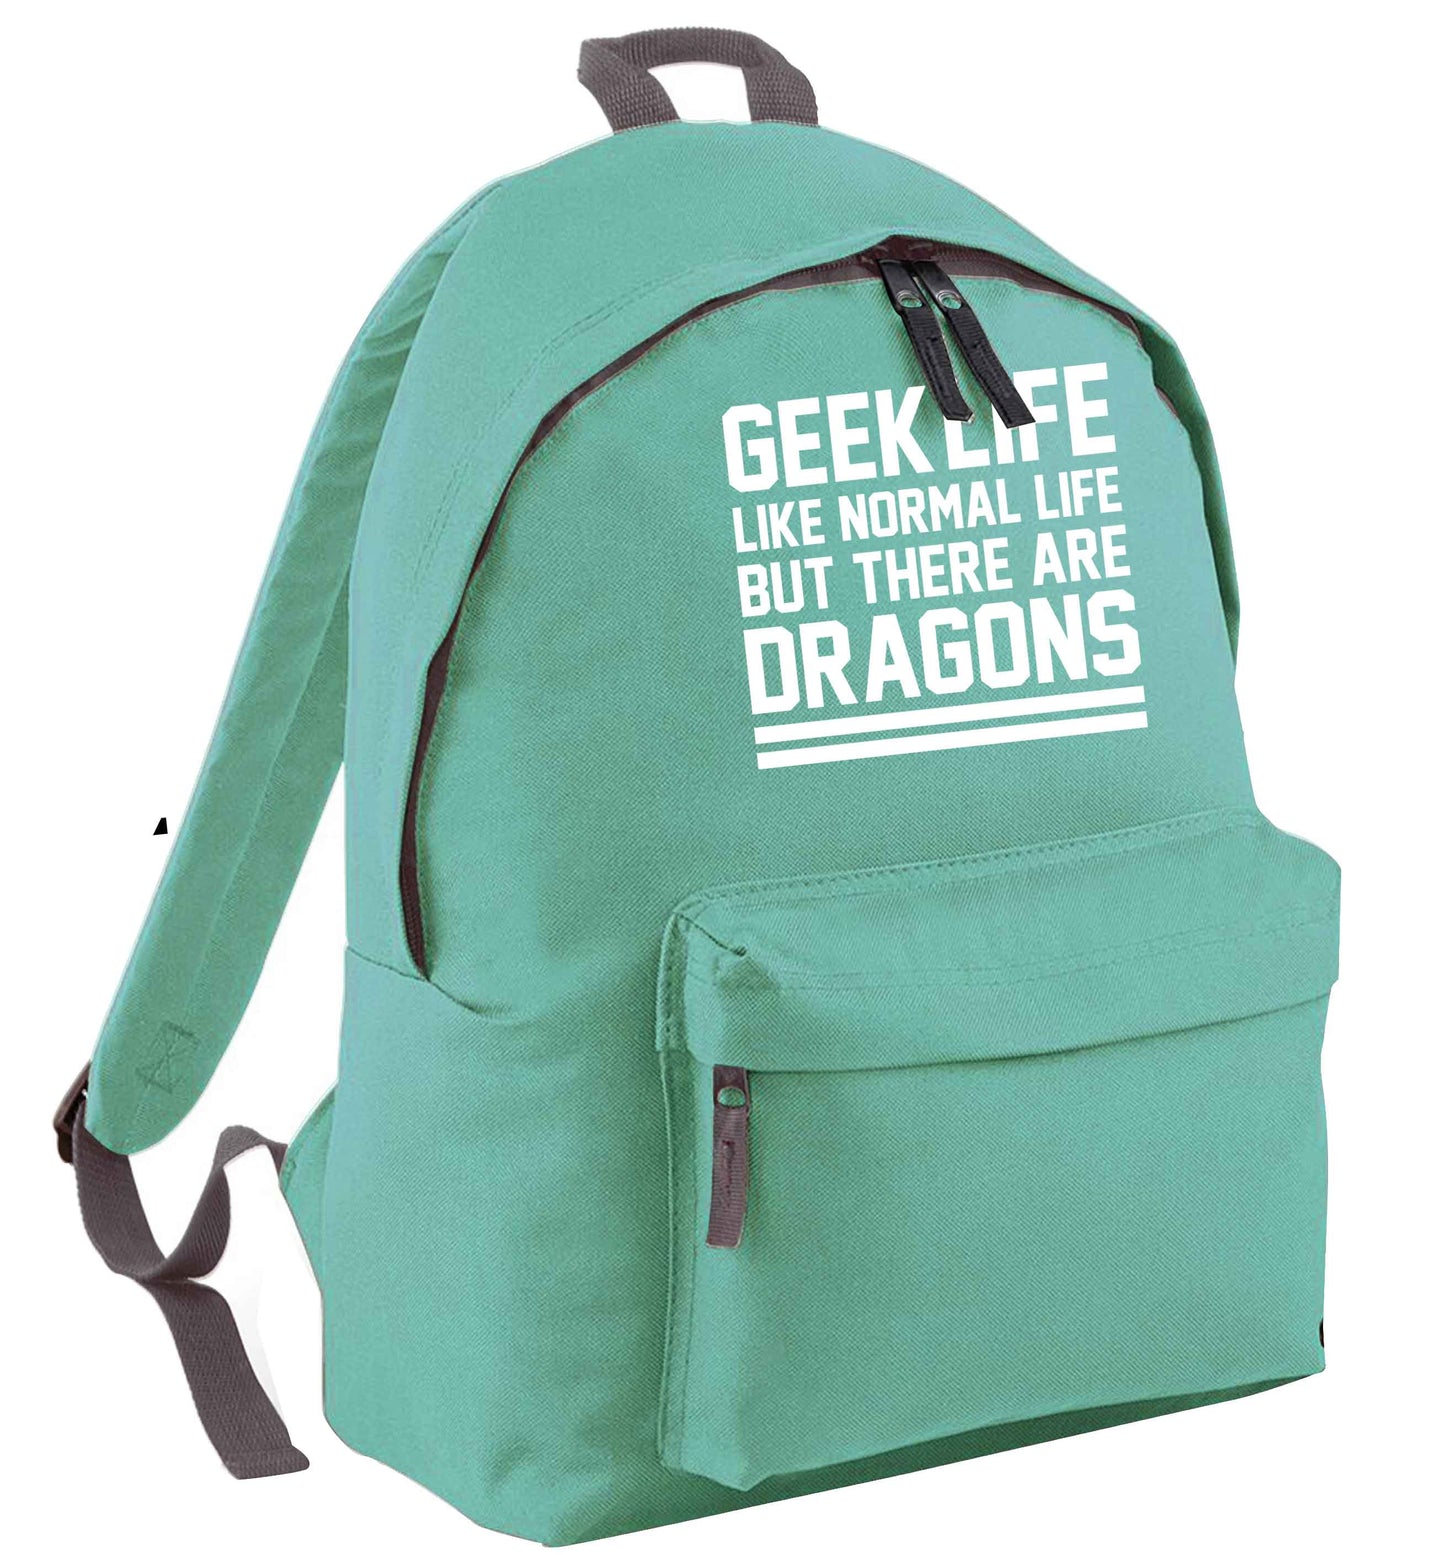 Geek life like normal life but there are dragons mint adults backpack